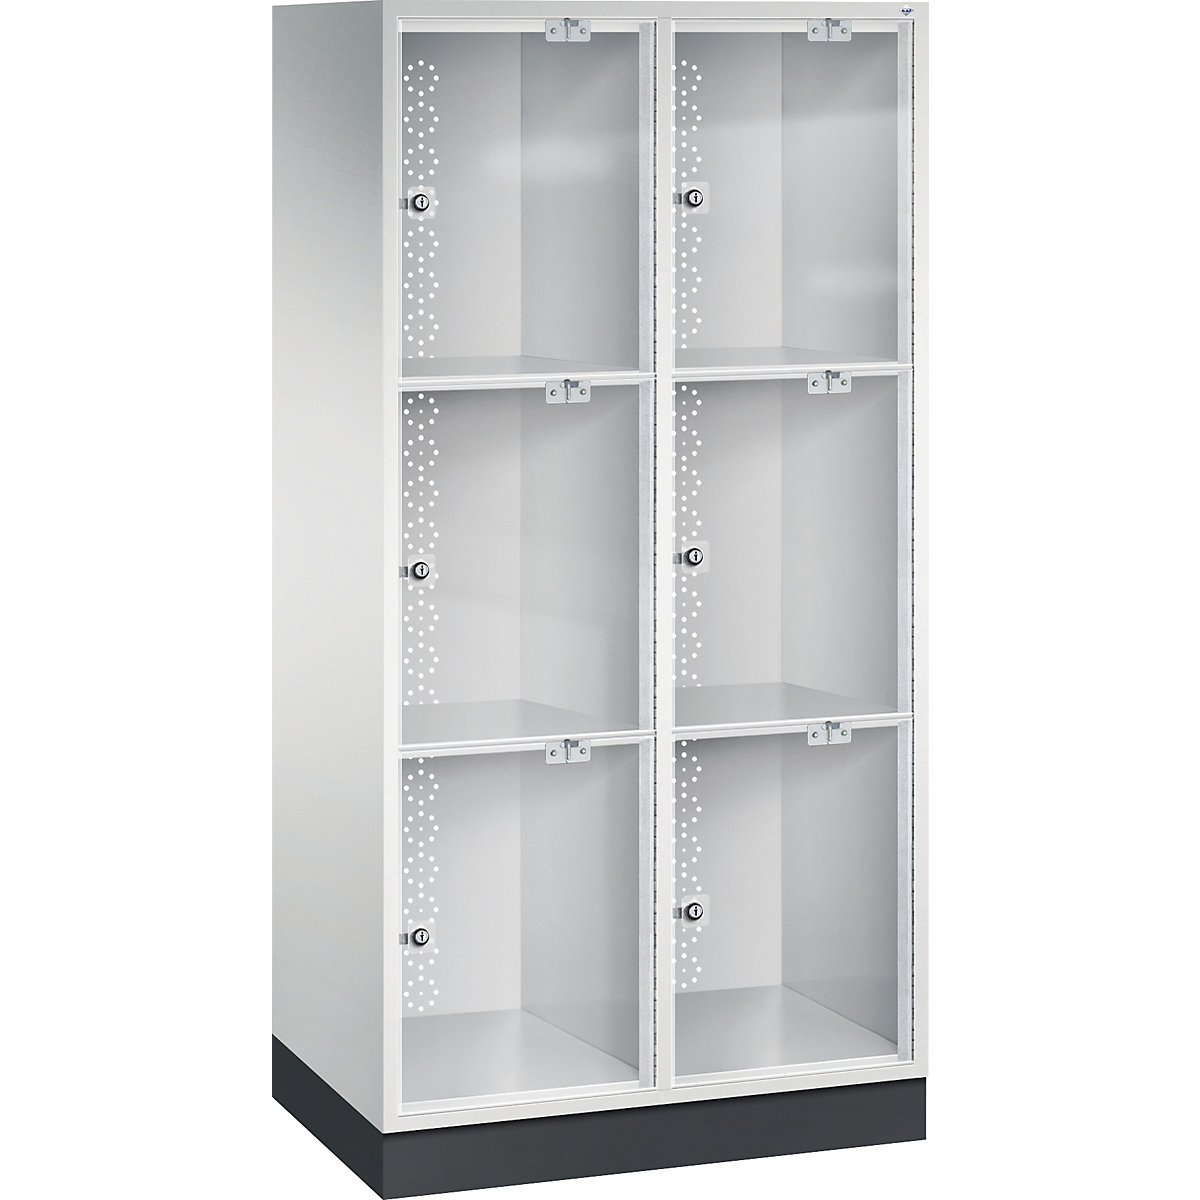 INTRO steel compartment locker with acrylic glass door – C+P: HxWxD 1750 x  820 x 500 mm, compartment height 510 mm, 6 compartments | kaiserkraft